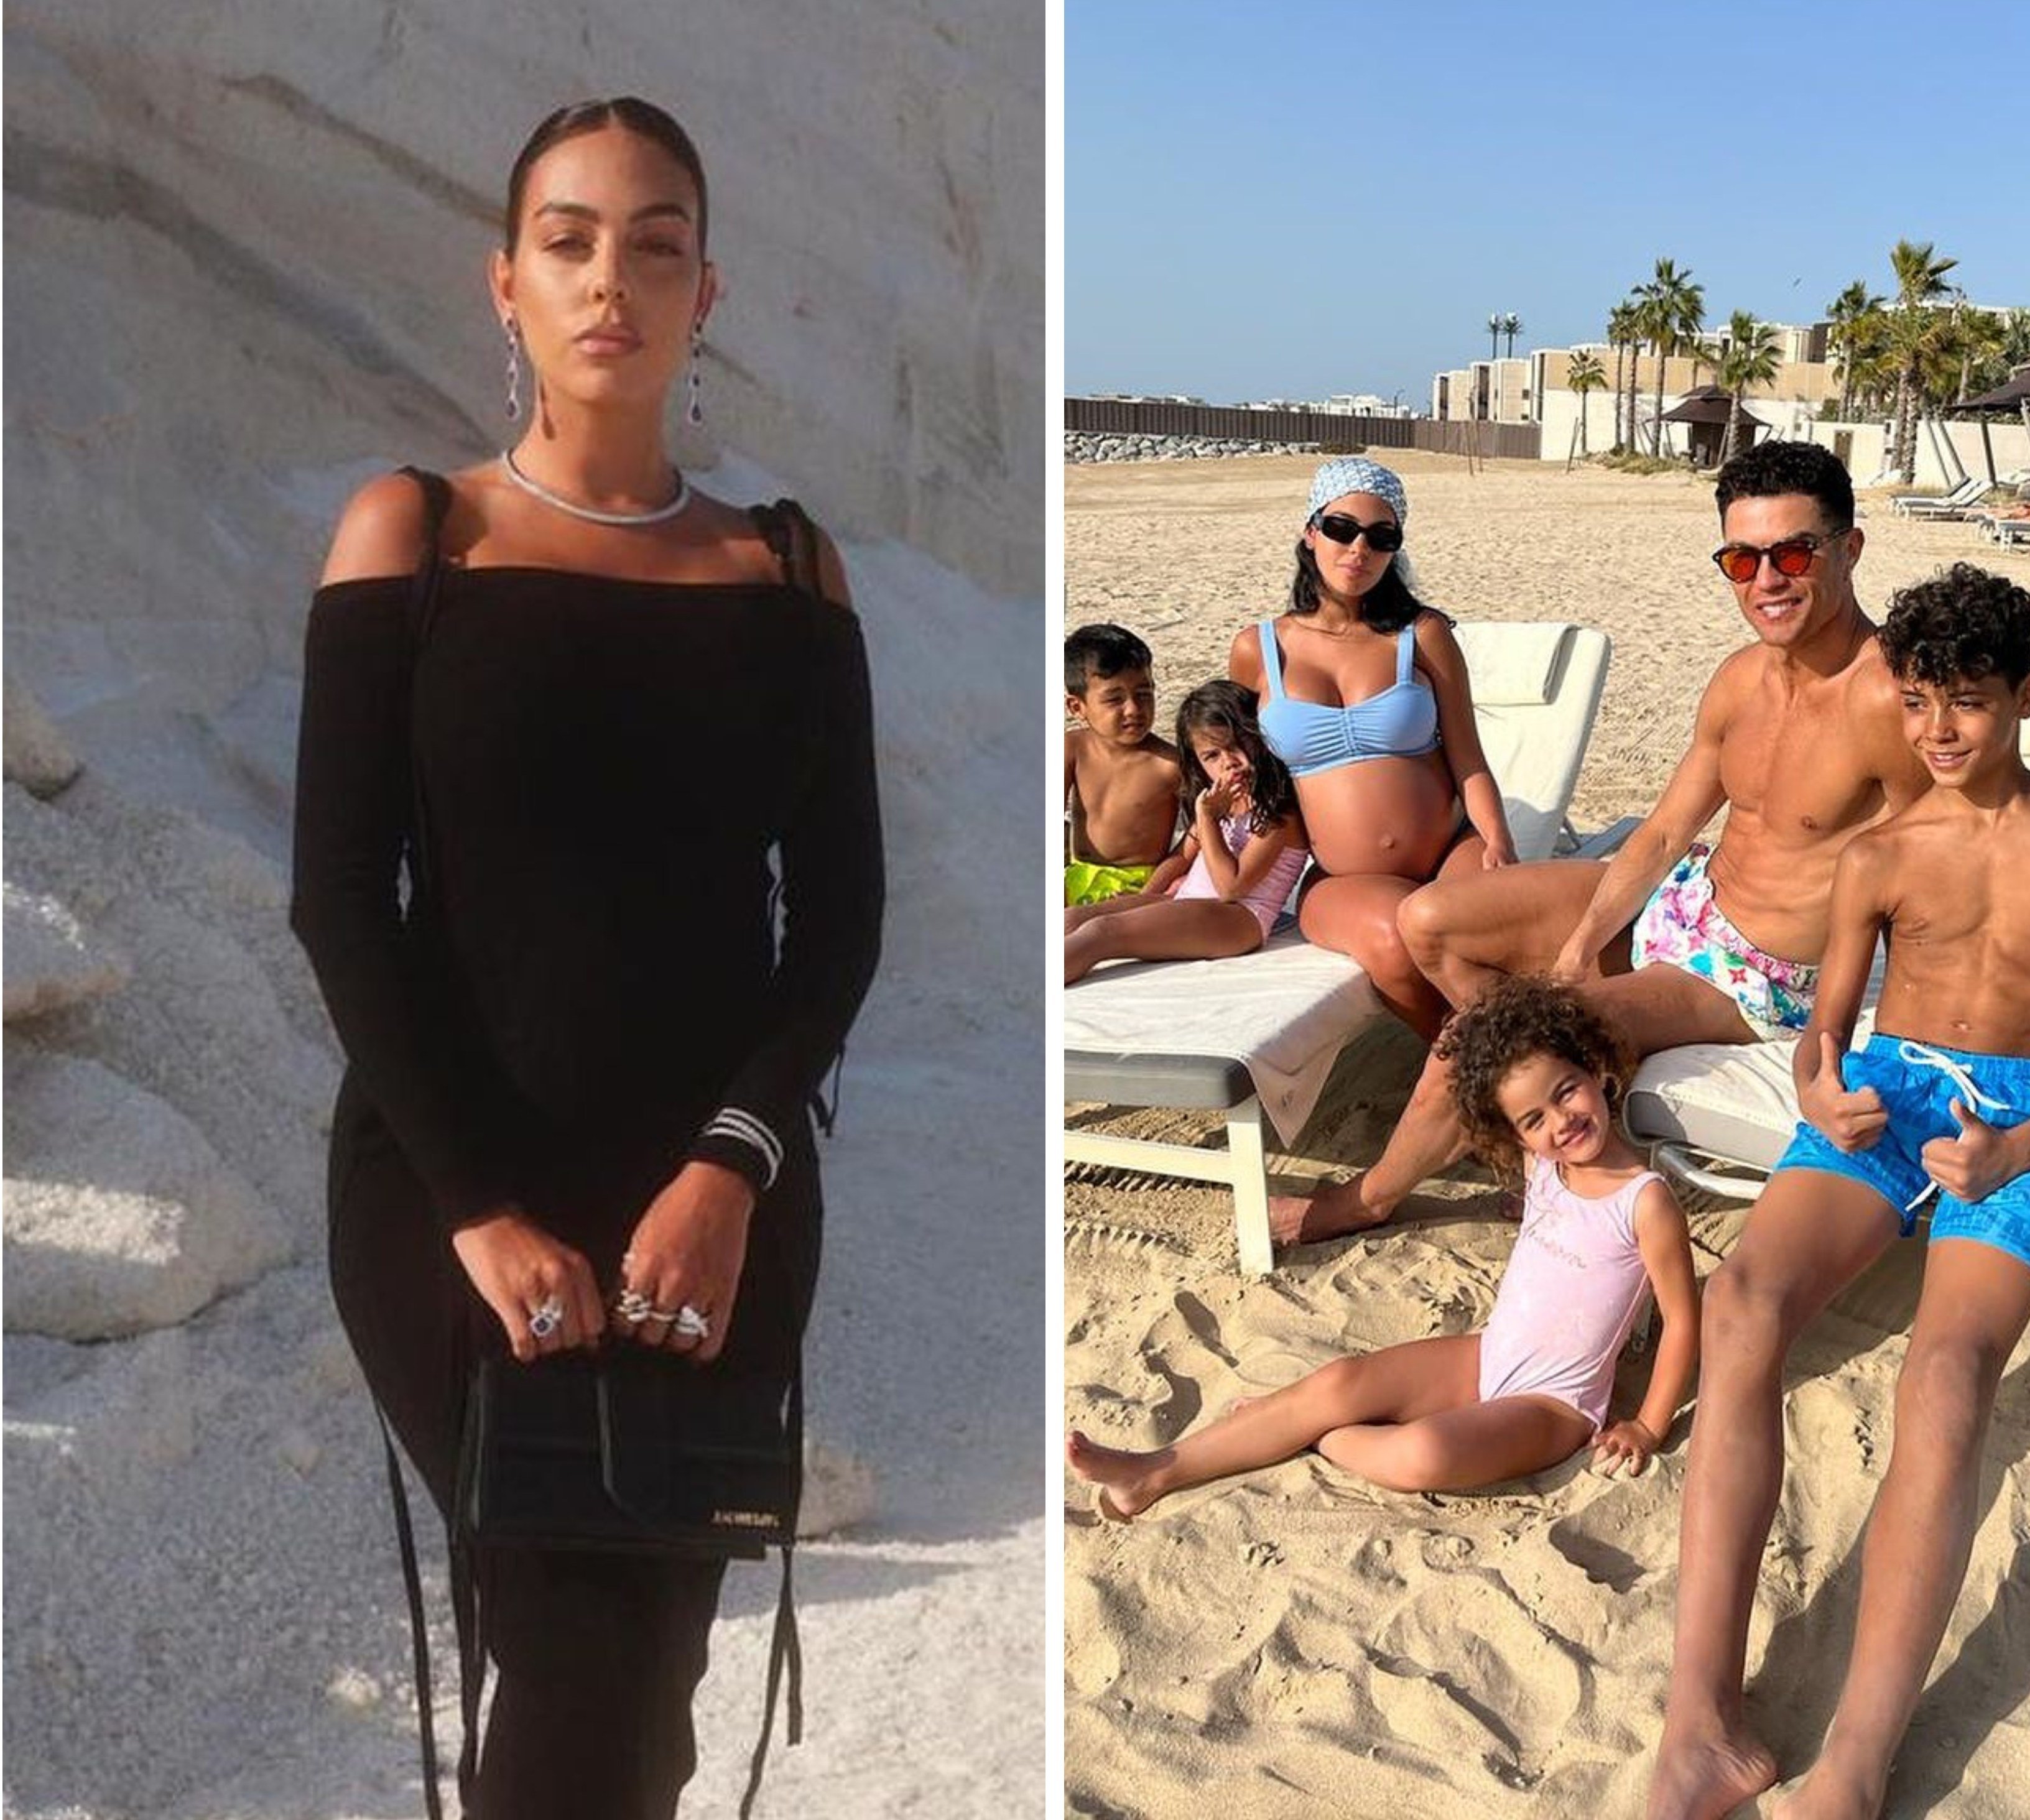 Cristiano Ronaldo and his family are enjoying their new life in Saudi Arabia, from luxury pads to Georgina Rodriguez becoming a style icon. Photos: @georginagio, @cristiano/Instagram